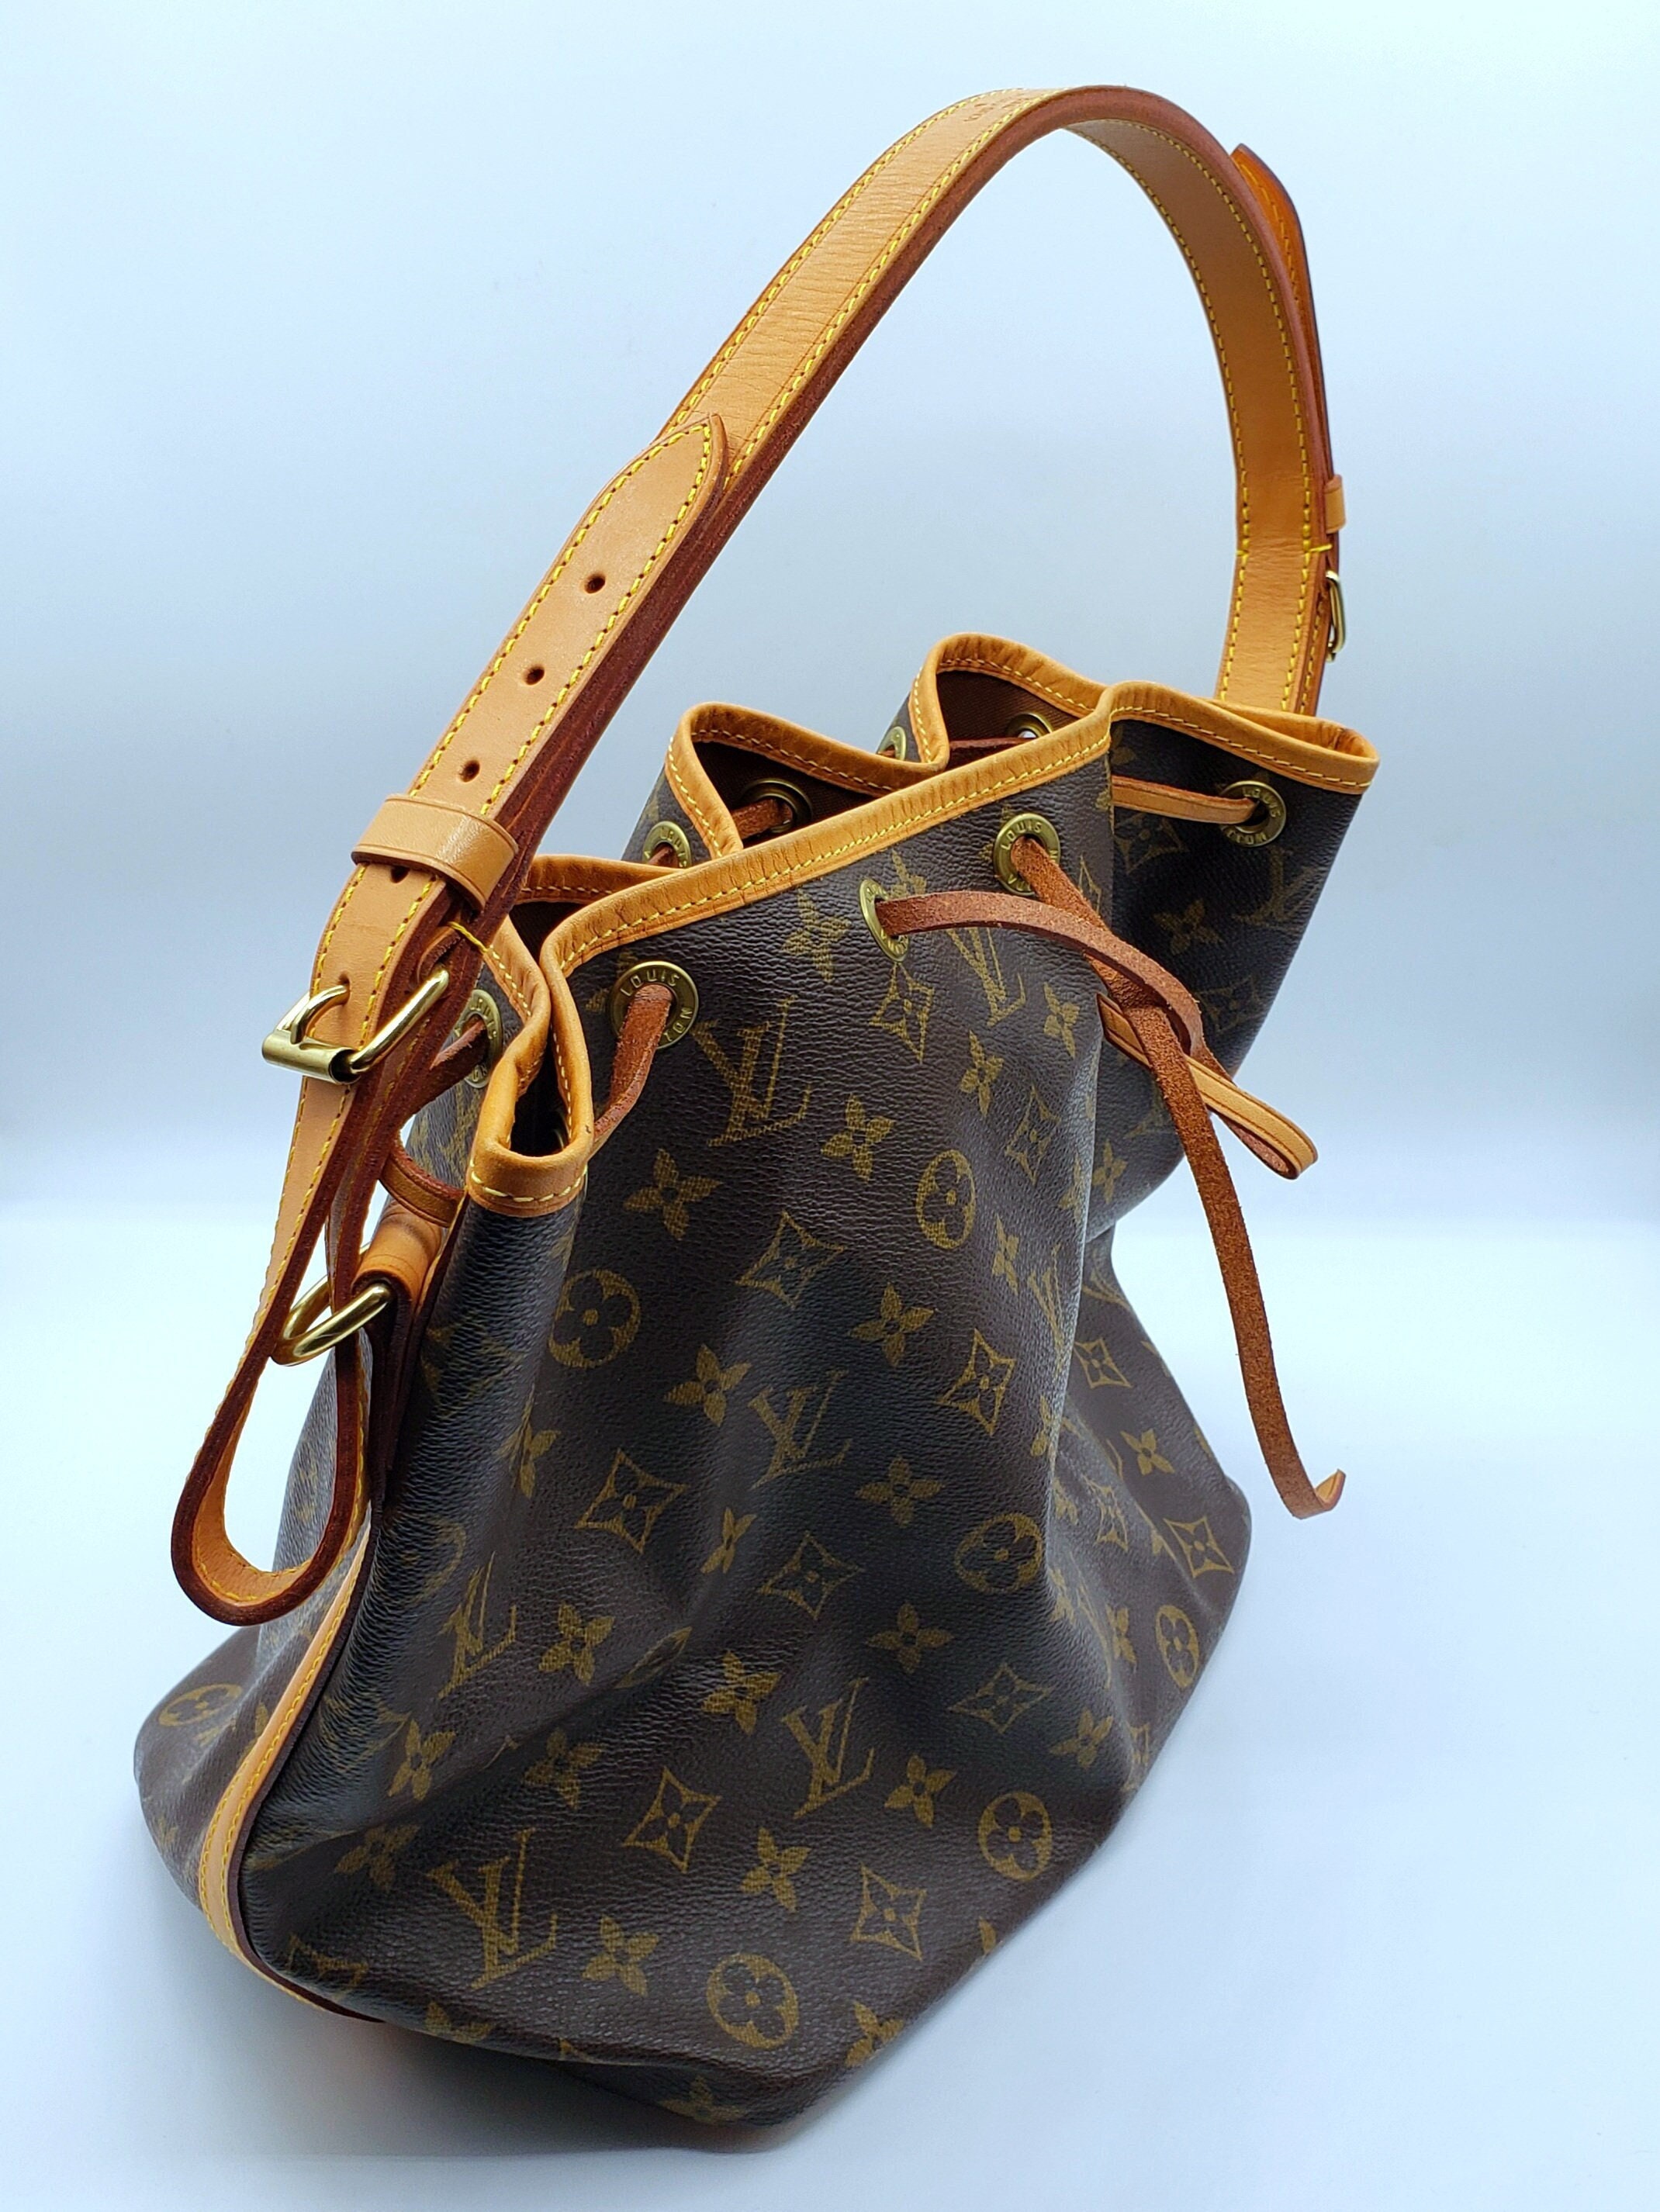 Pin by Cali Molina on Bag lady  Louis vuitton bag neverfull, Purses, Bags